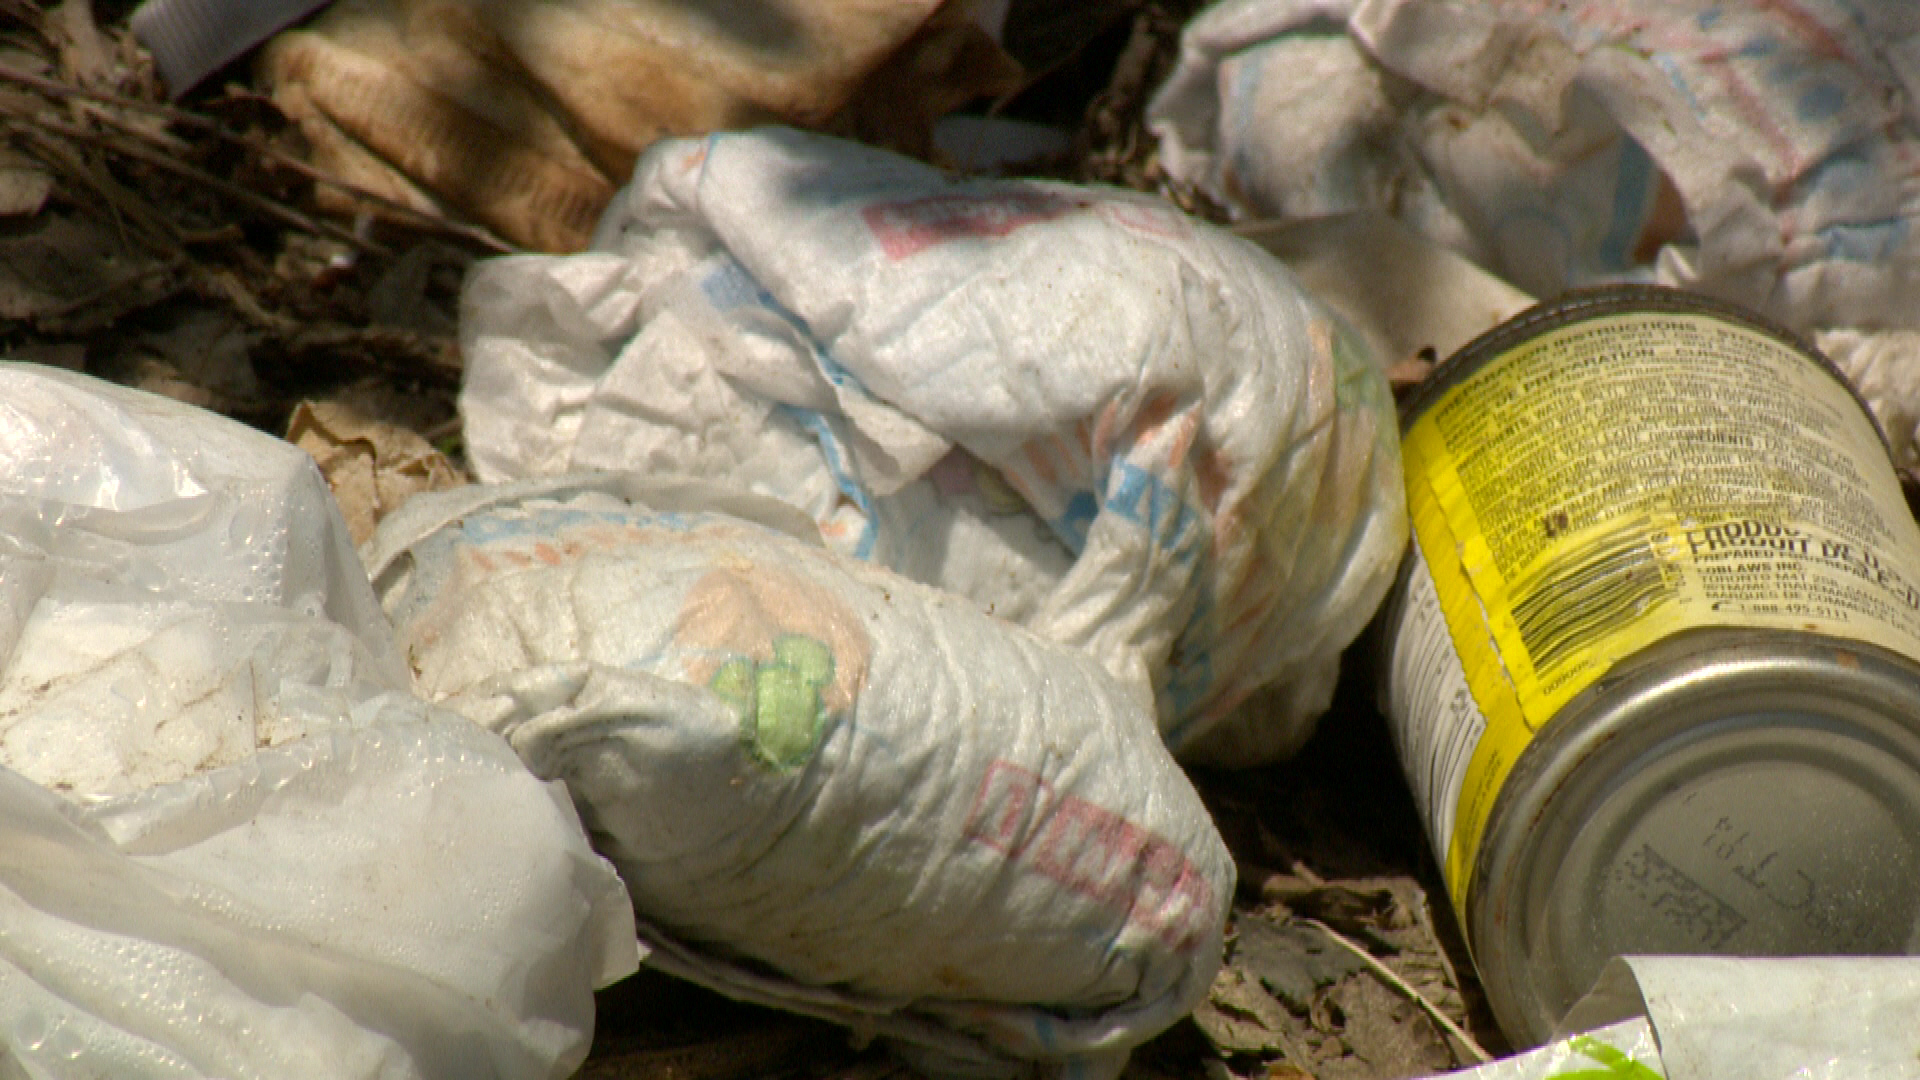 Volunteers come together to clear Regina North Central garbage piles